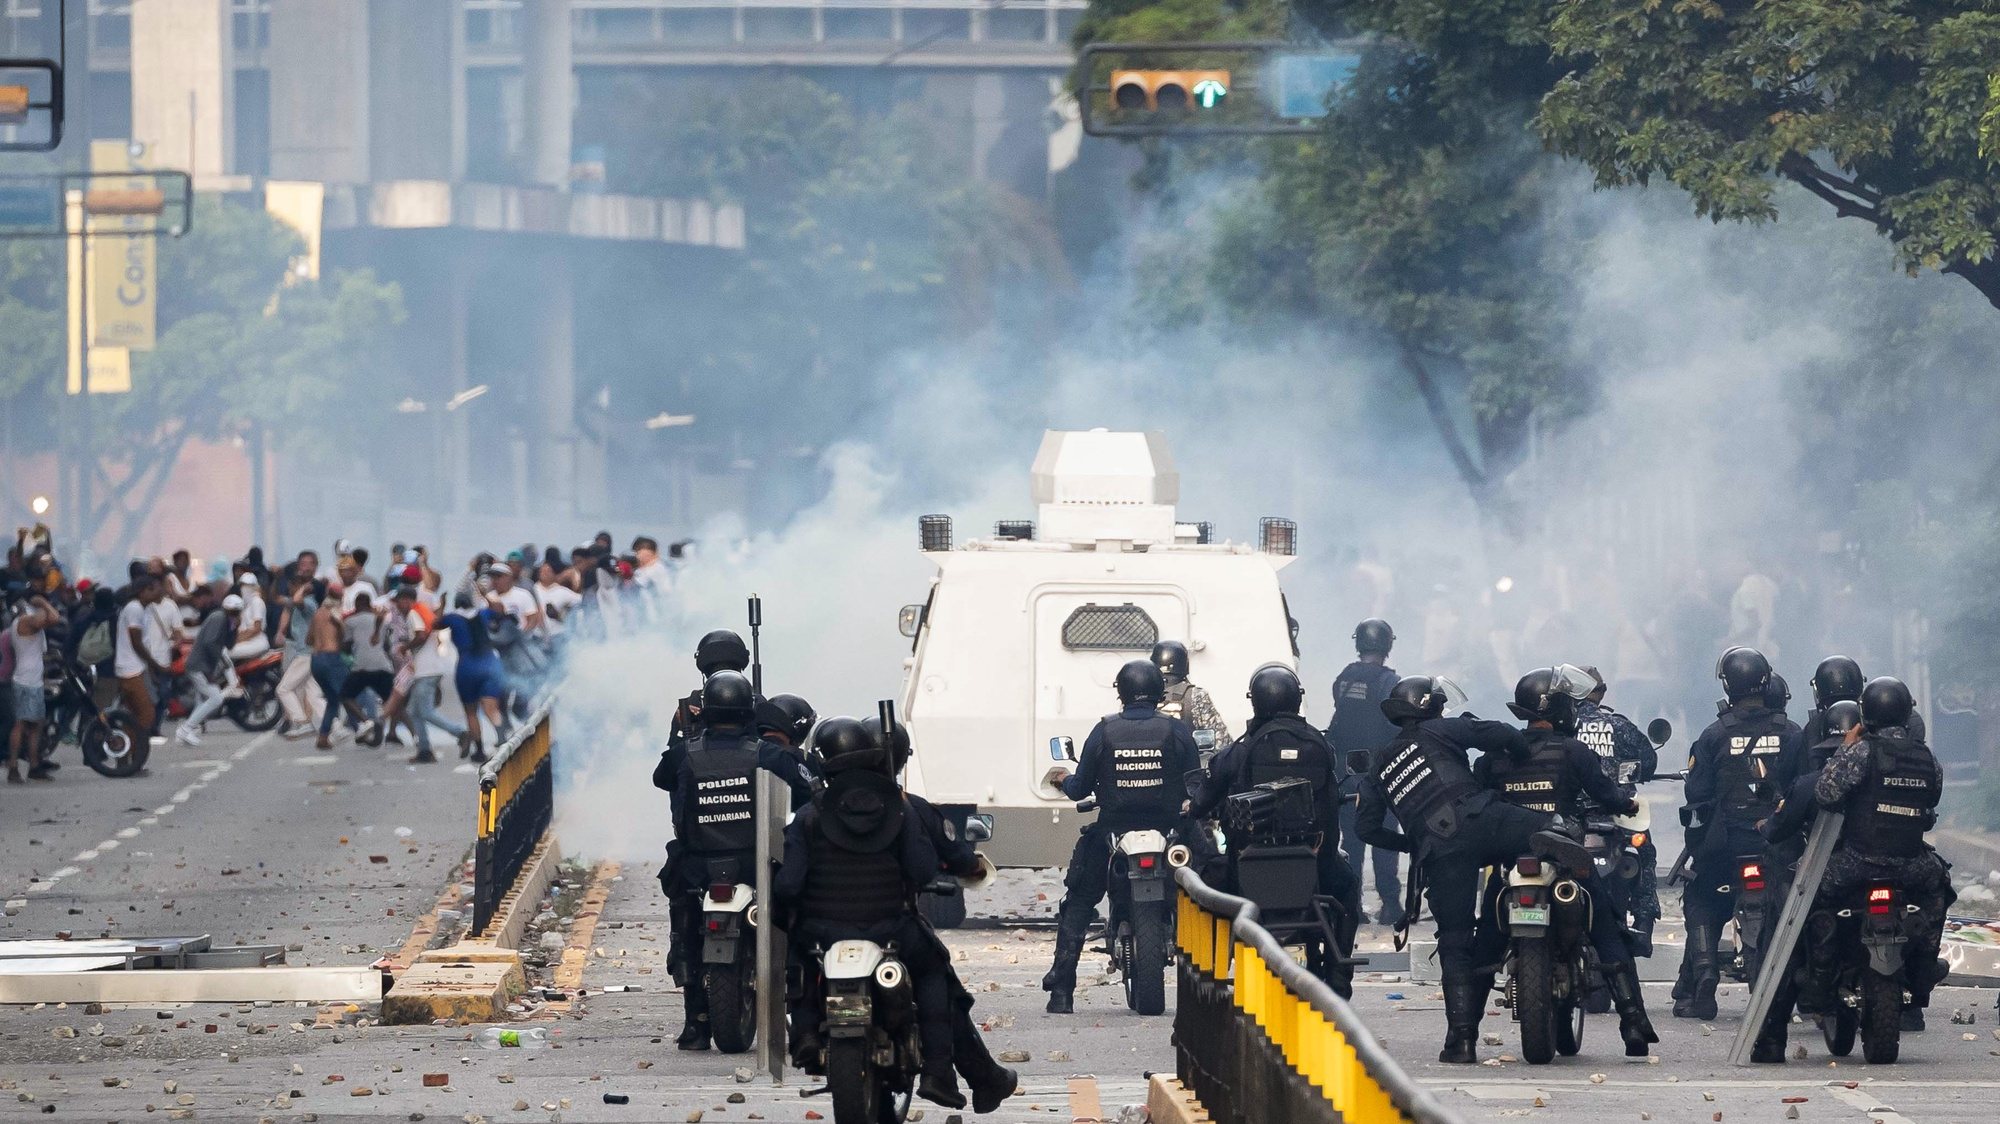 epaselect epa11507675 Members of the Bolivarian National Police (PNB) and the Bolivarian National Guard (GNB) clash with opposition demonstrators during protests over the results of the presidential elections in Caracas, Venezuela, 29 July 2024. Protests are taking place in Caracas after the National Electoral Council (CNE) proclaimed that Nicolas Maduro was re-elected president of Venezuela, following elections held on 28 July. Thousands of citizens have come out to protest against the results announced by the National Electoral Council (CNE), which gave President Maduro 51.2% of the votes, a figure questioned by the opposition and by a good part of the international community. Opposition leader Maria Corina Machado claims they have obtained enough of the vote tallies to prove they won the presidential elections that took place on 28 July.  EPA/Henry Chirinos